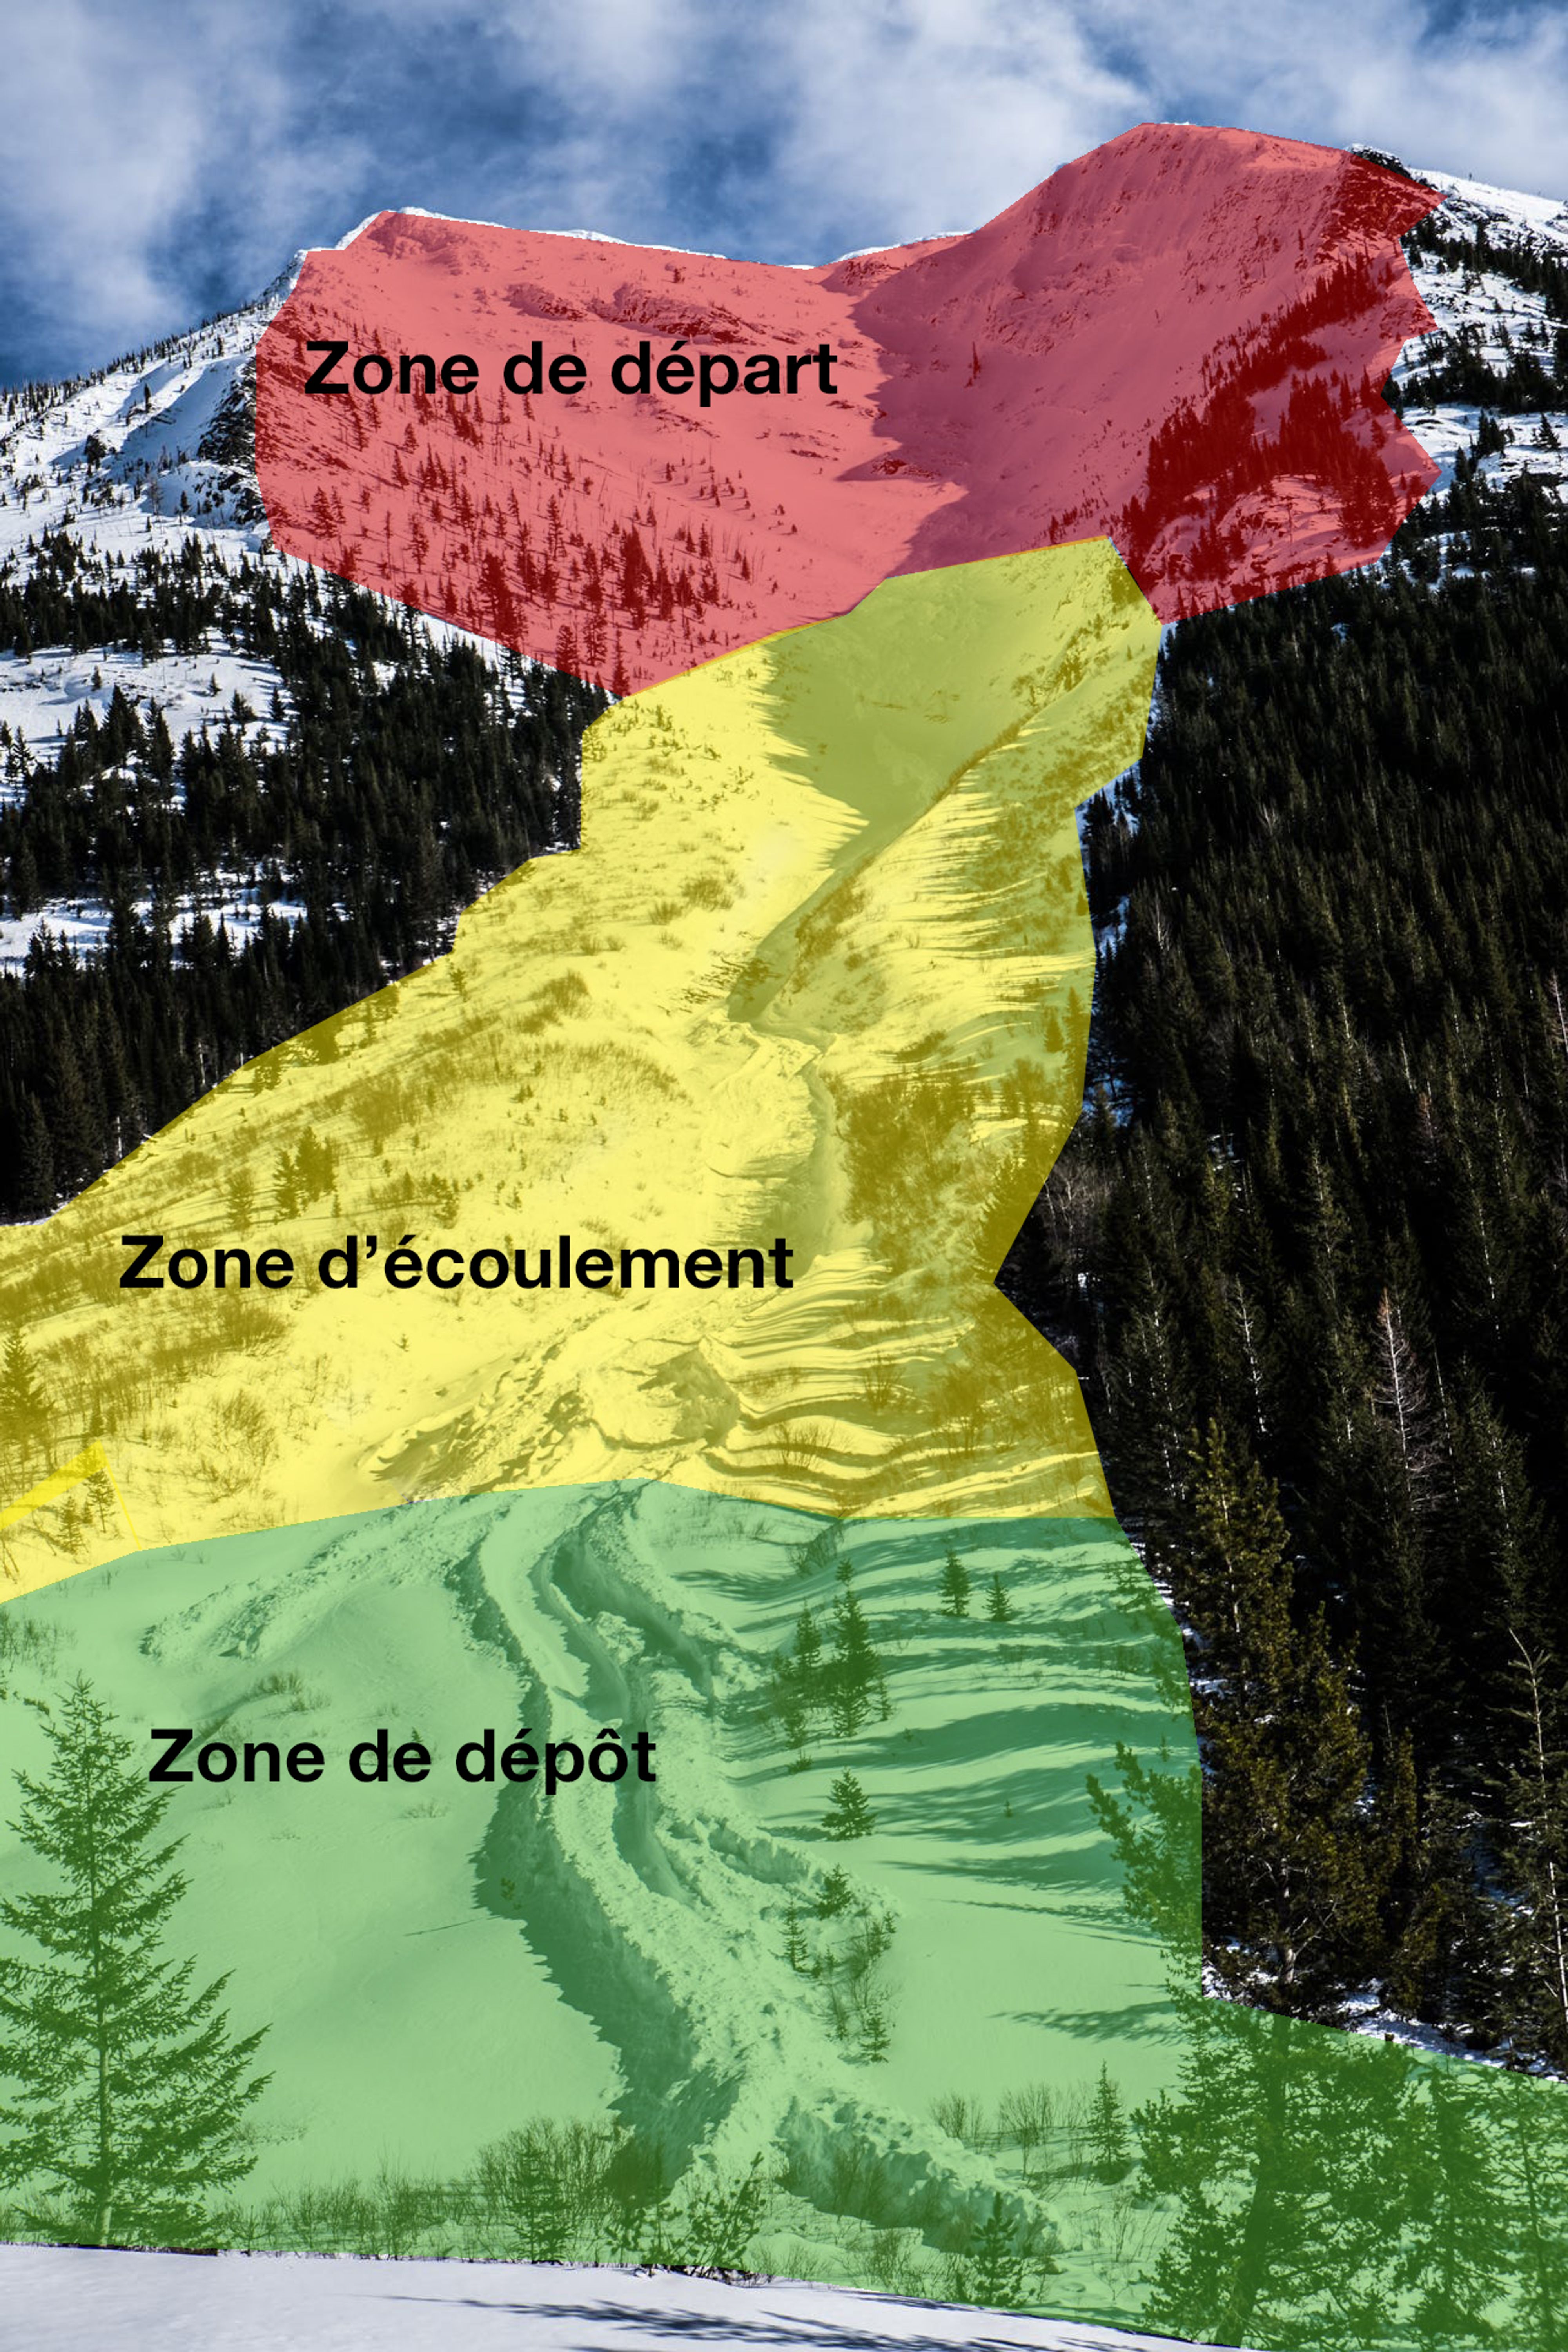  Avalanche paths, also called slide paths, are composed of three parts. The top is called the start zone, where the avalanches begin. At the bottom is the runout zone, where avalanches lose steam and come to a stop. In between, where the slide runs, is the track. This is where the avalanche hits its greatest speed.